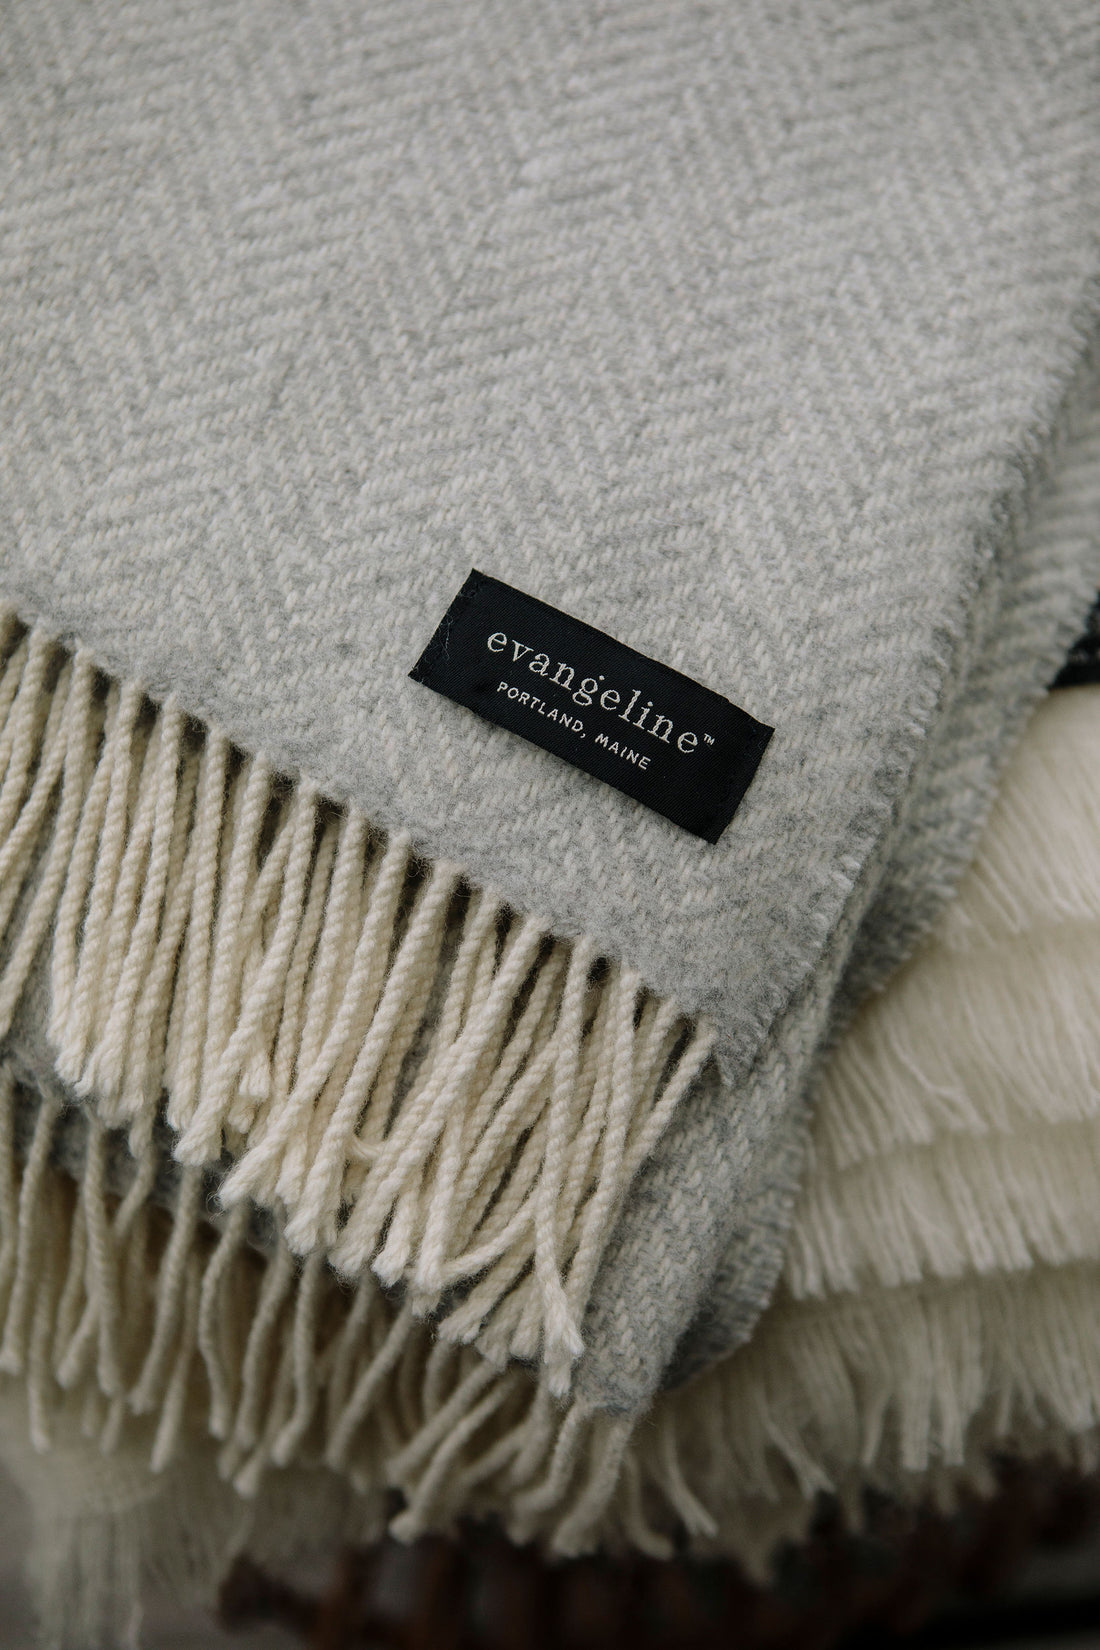 A detail photo of the cream fringe on the edge of Fog / light grey throw. Displays the sewn on evangeline Portland Maine tag on the bottom corner of the throw.